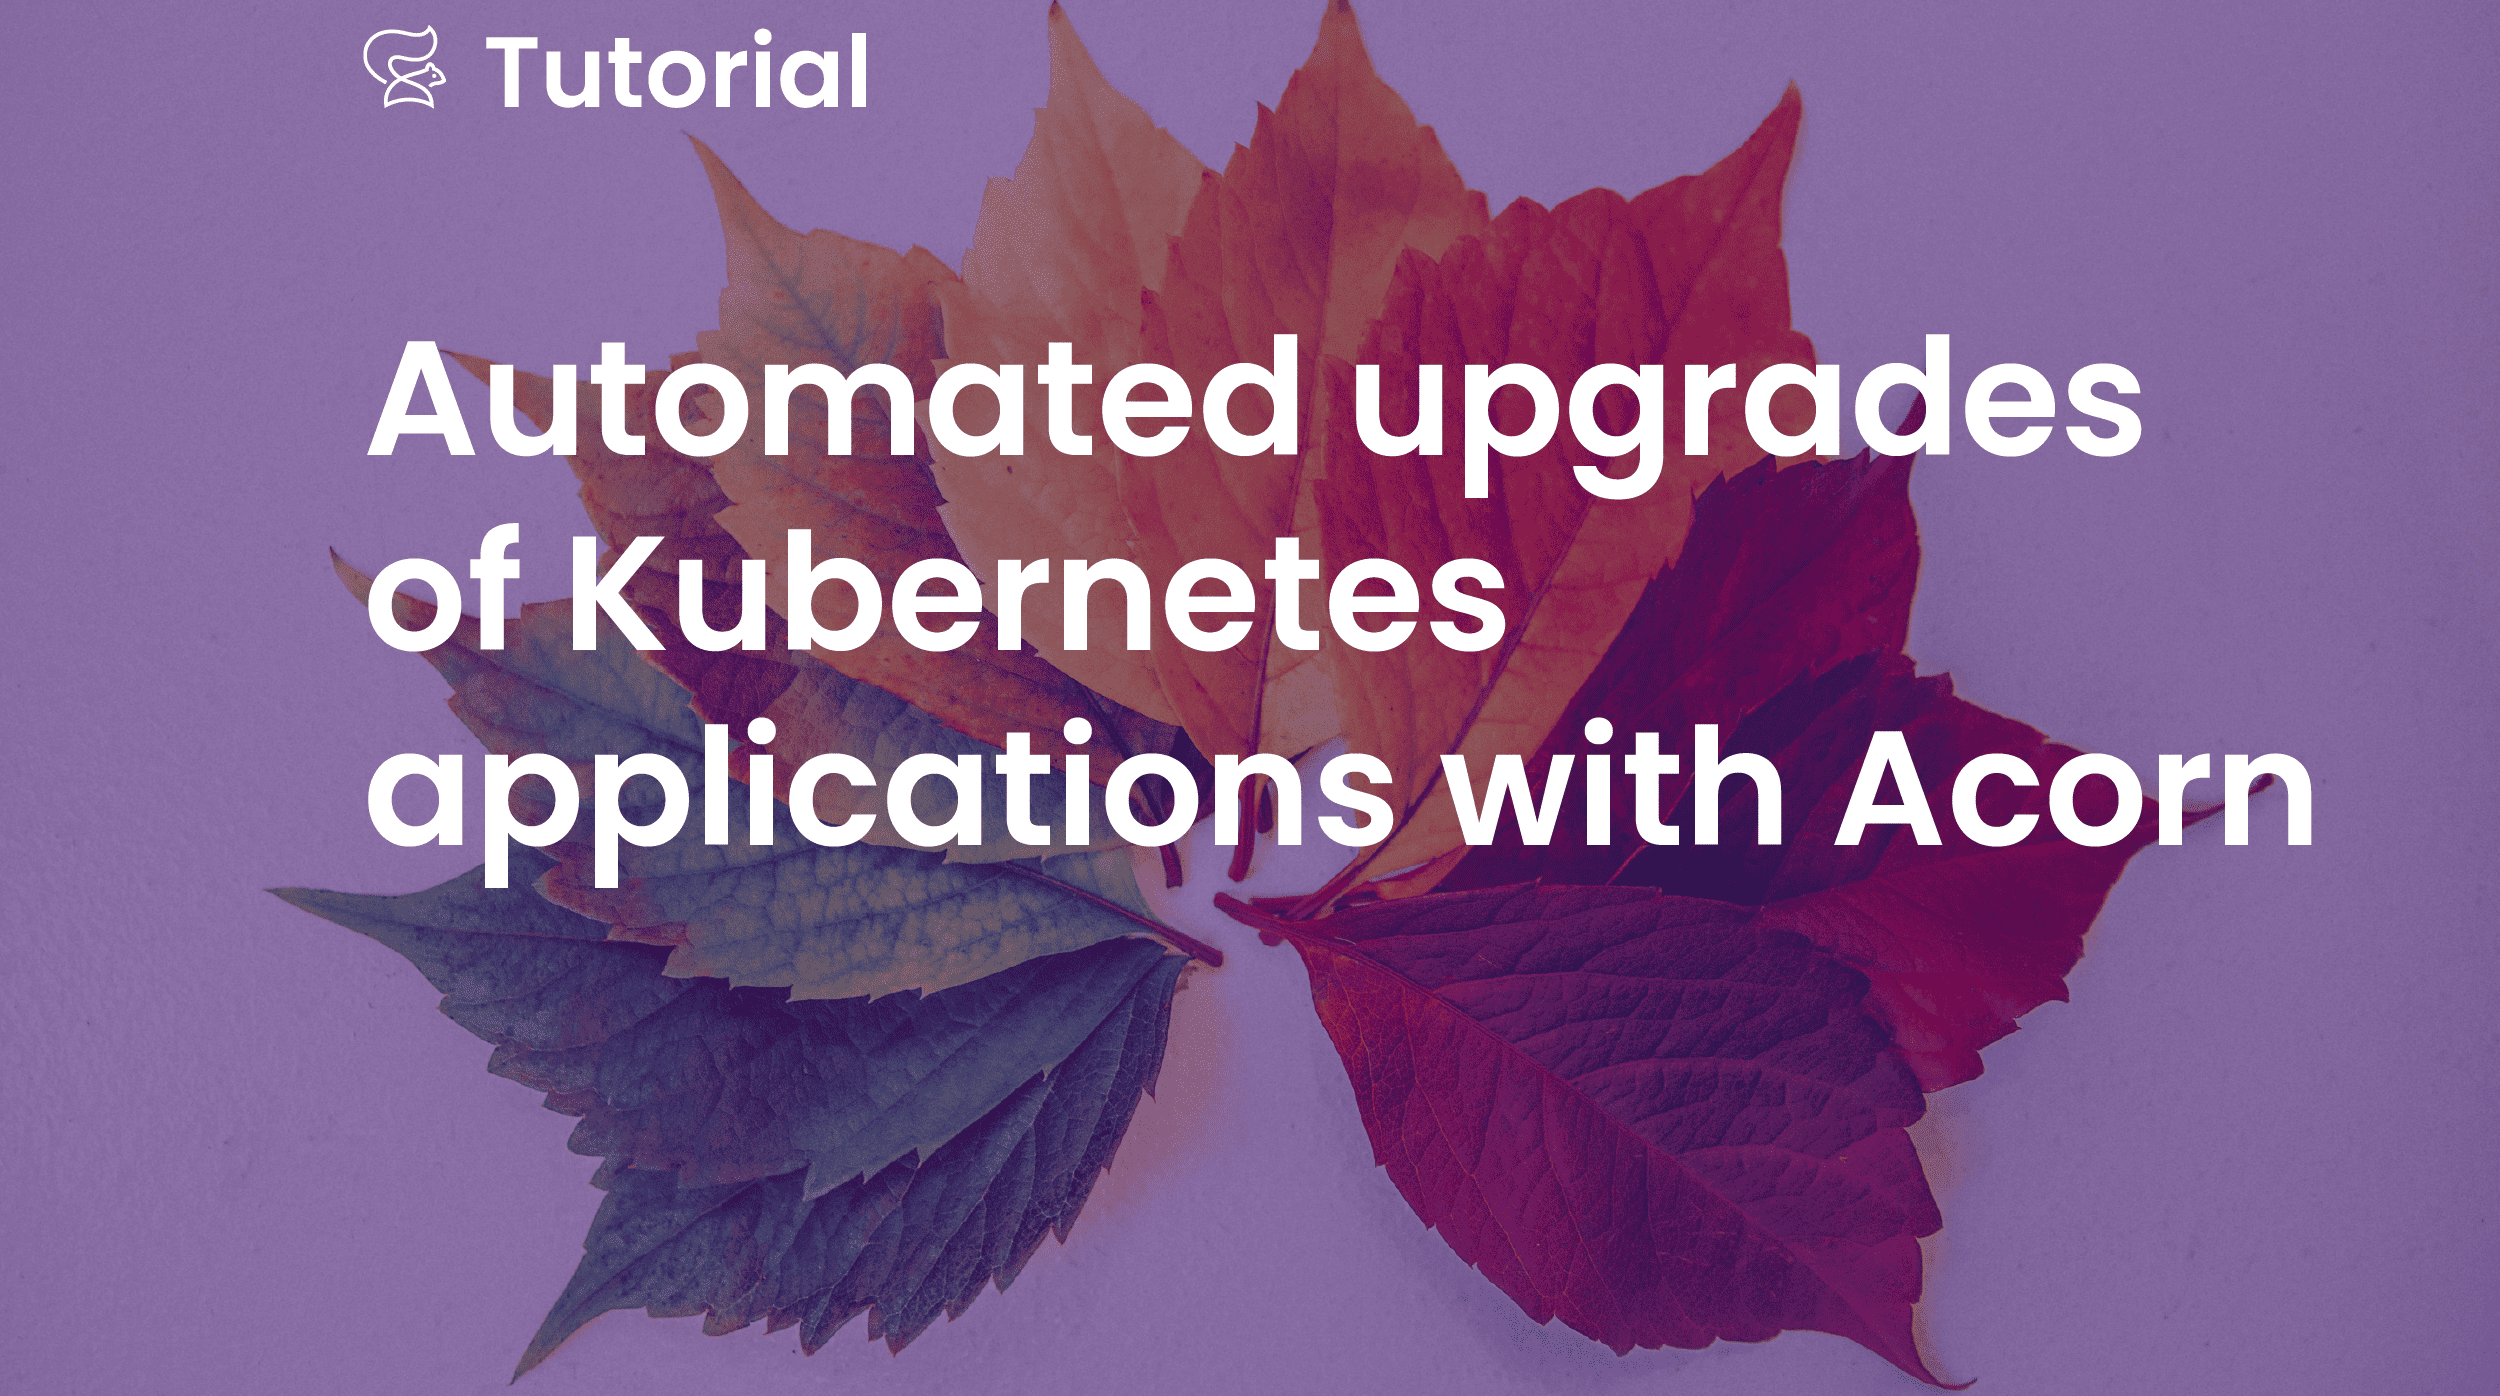 Automated upgrades of Kubernetes applications with Acorn